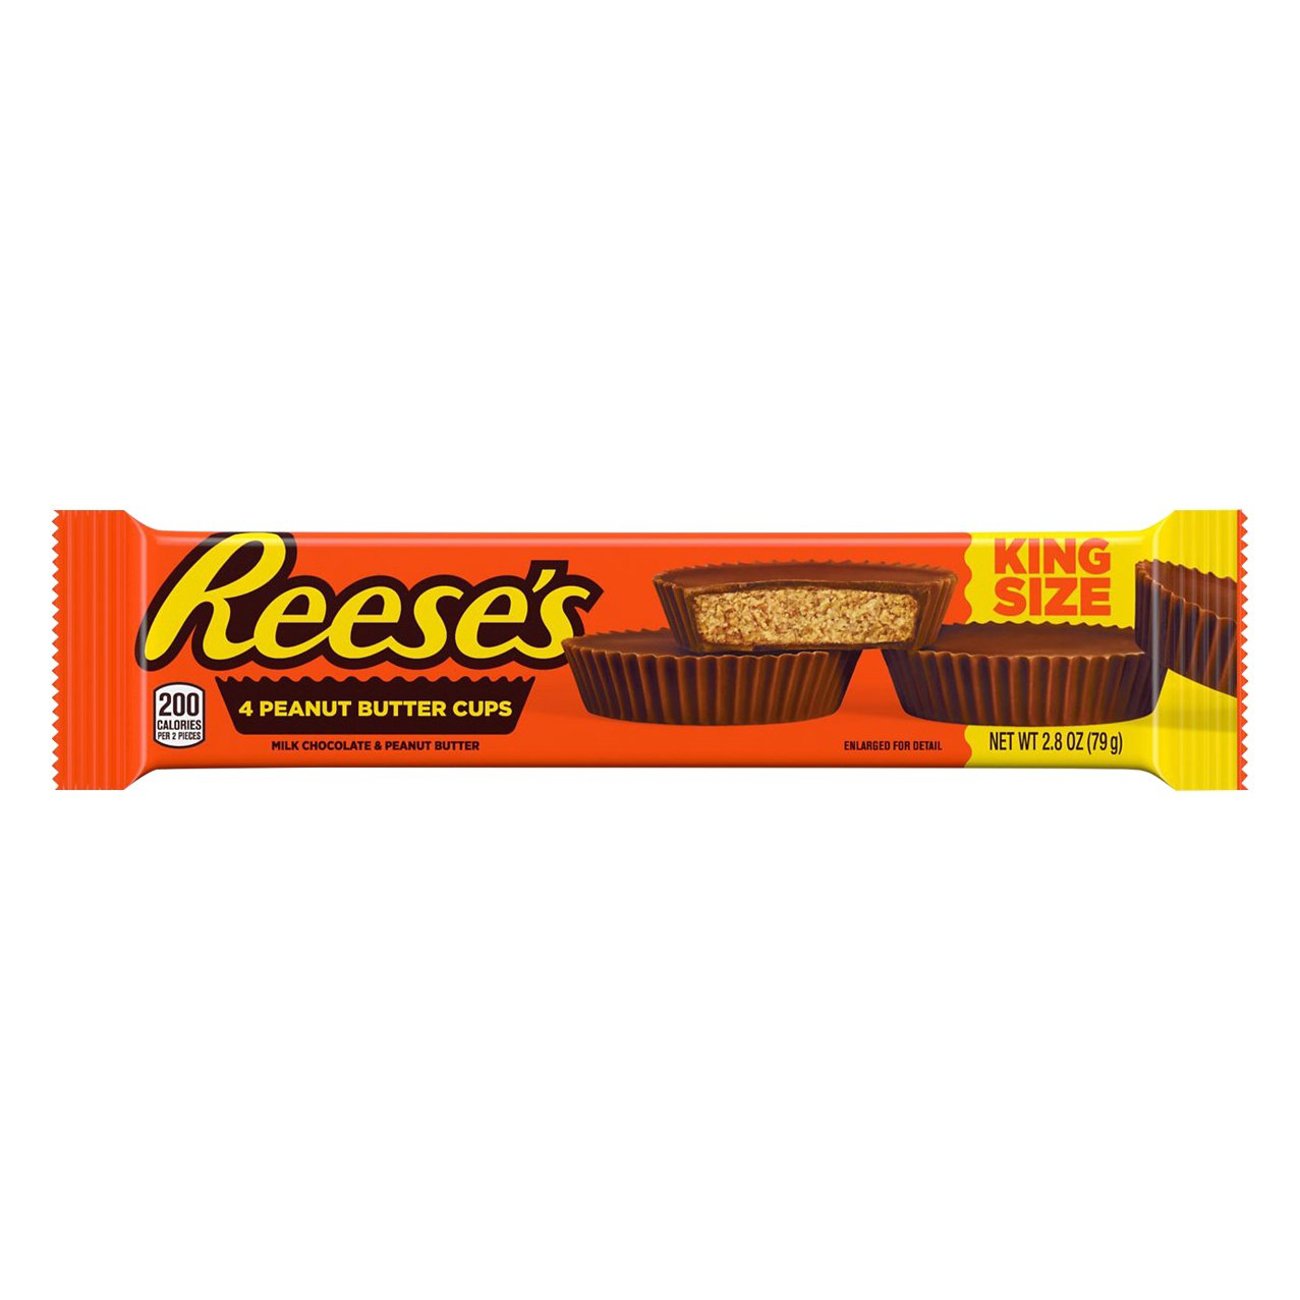 How much sugar is in one reeses peanut butter cup Reese S King Size Peanut Butter Cups Shop Candy At H E B